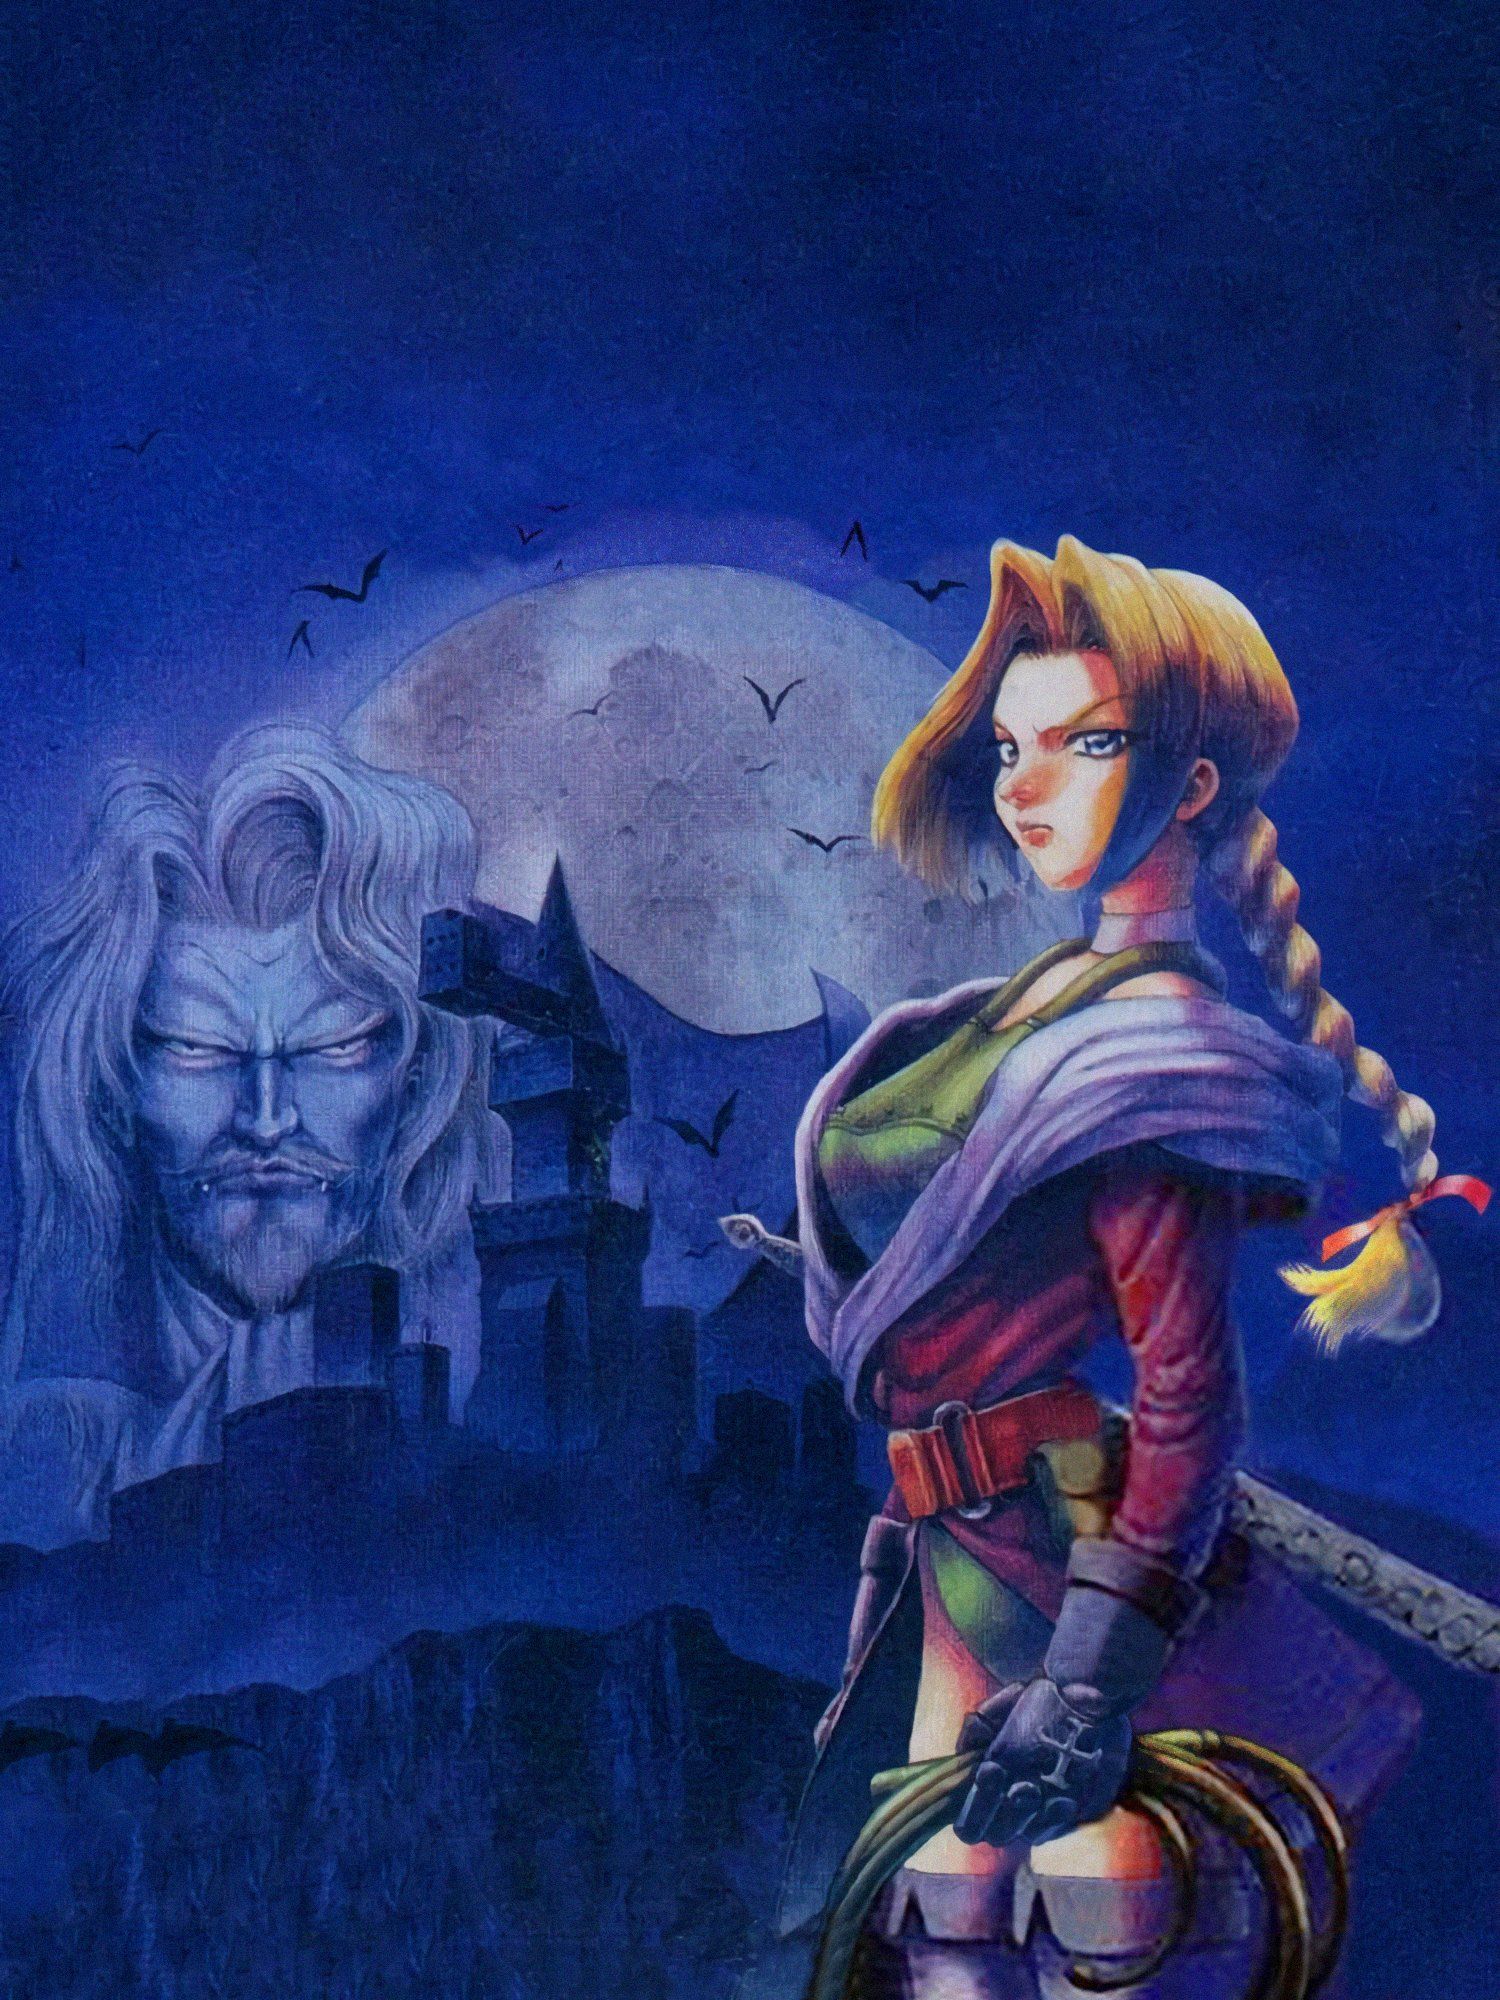  Castlevania Hintergrundbild 1500x2000. Pedro Soares on X: I never considered #Castlevania Legends to be a good game but it has grew on me over the years and I kinda dig the 90s anime aesthetic they